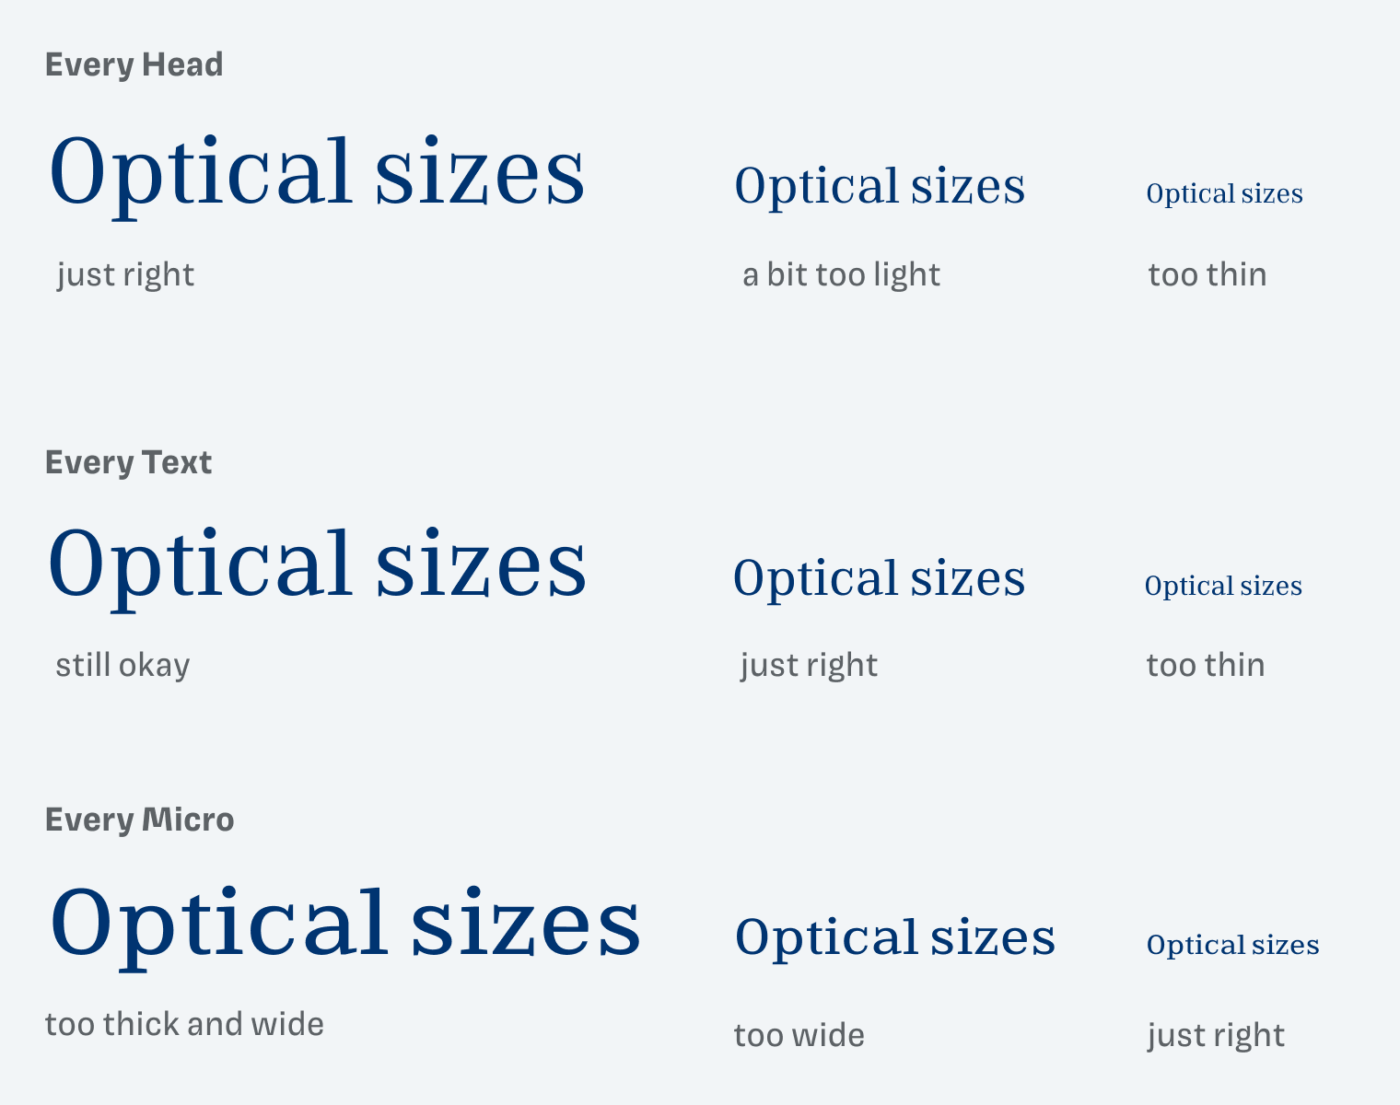 Comparing the optical sizing o Every Head, Every Text and Every Micro